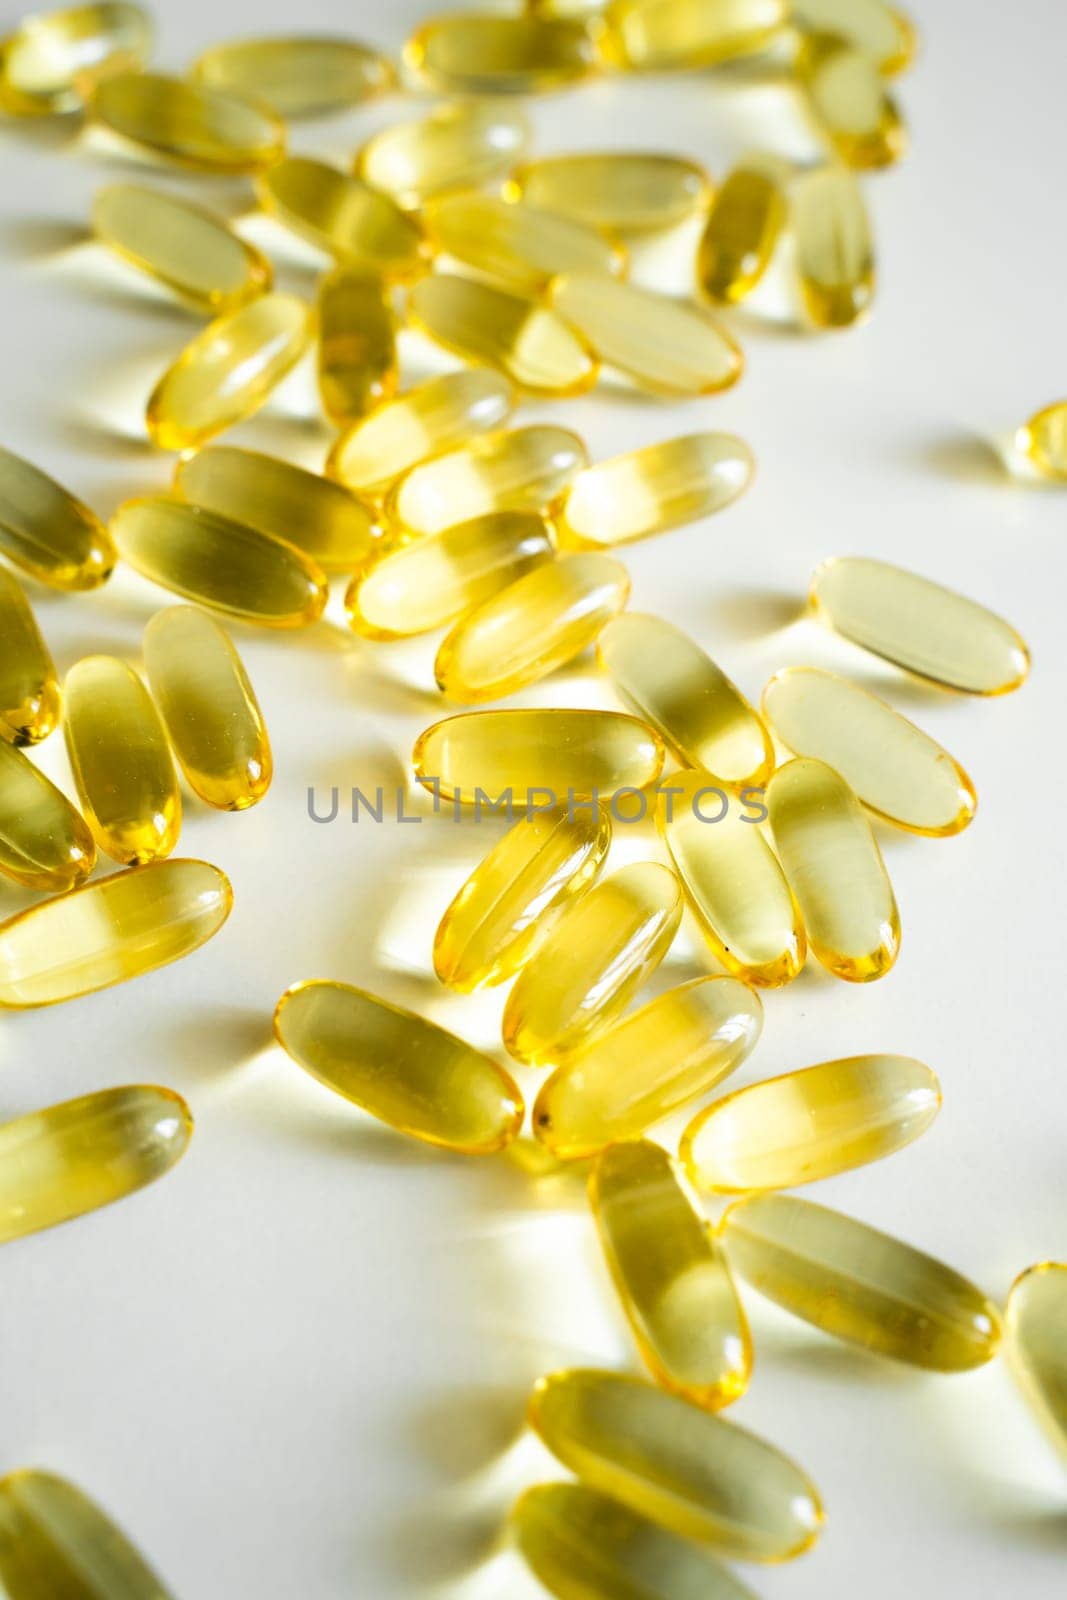 Gelatin capsules of omega 3, 6, 9 fish oil, vitamin isolated on a white surface as a background